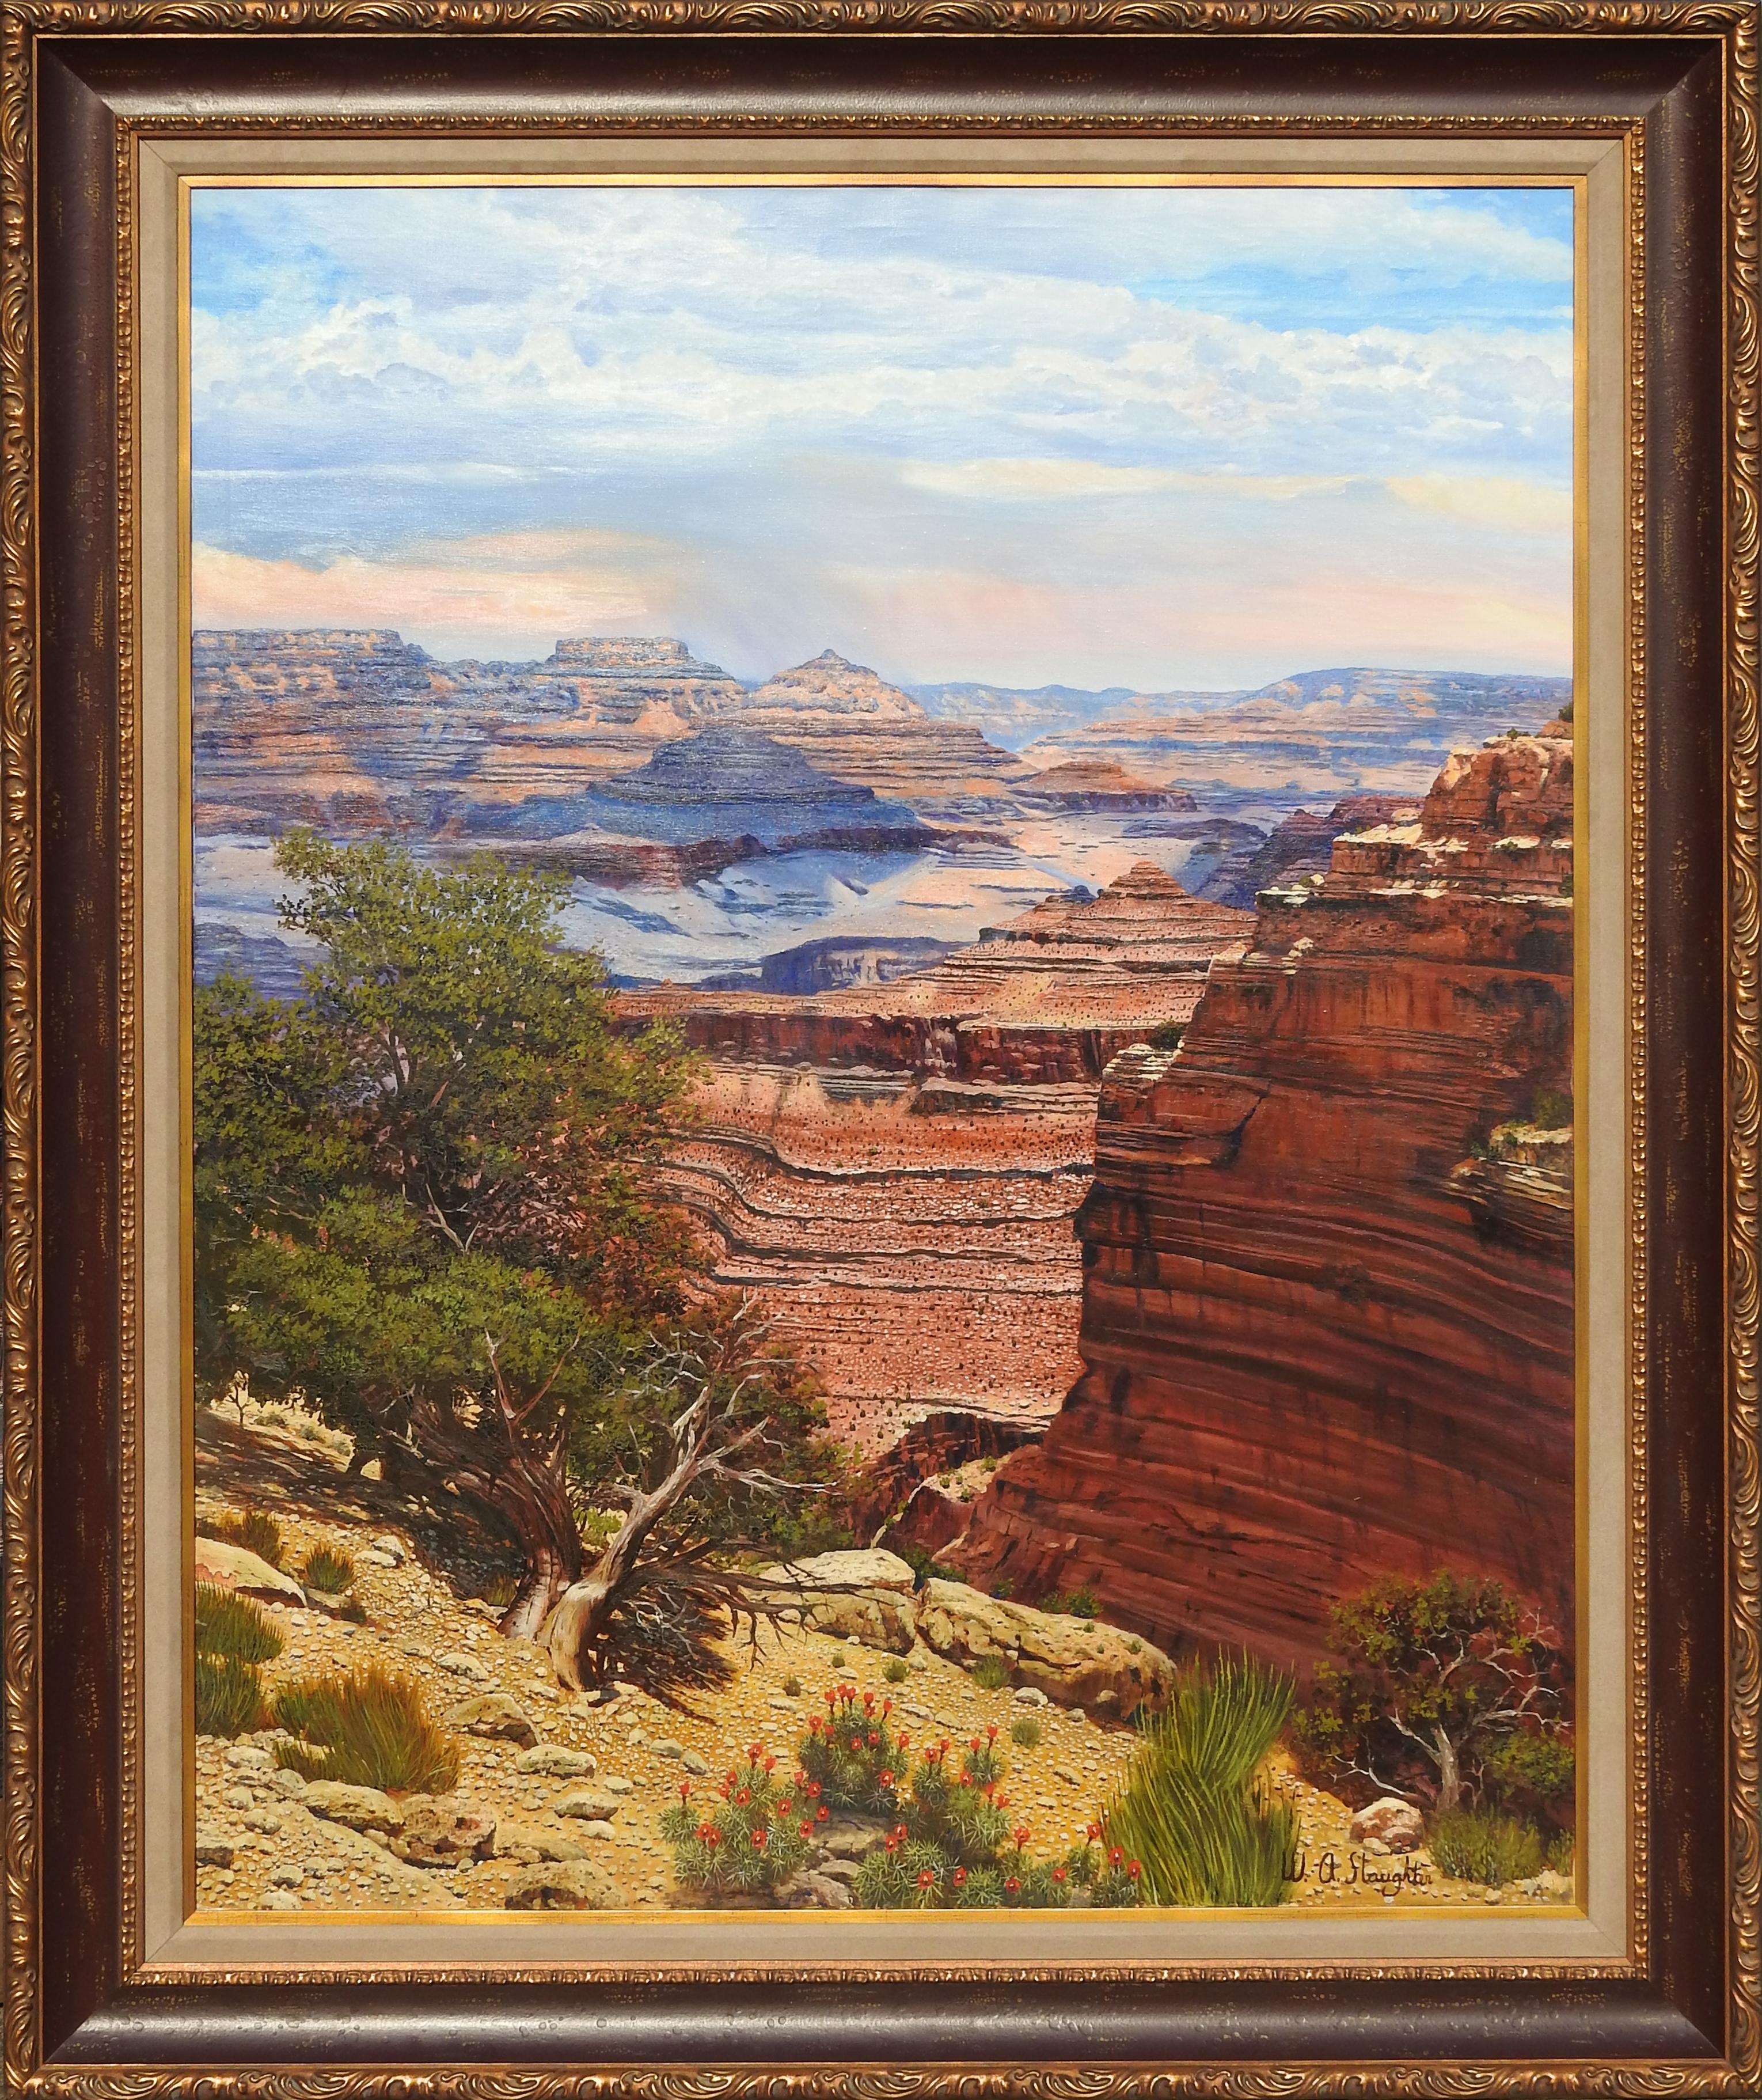 William A. Slaughter Landscape Painting - "Grand Canyon", W.A. Slaughter, Rare Original, Oil on Canvas, 60x48 in.